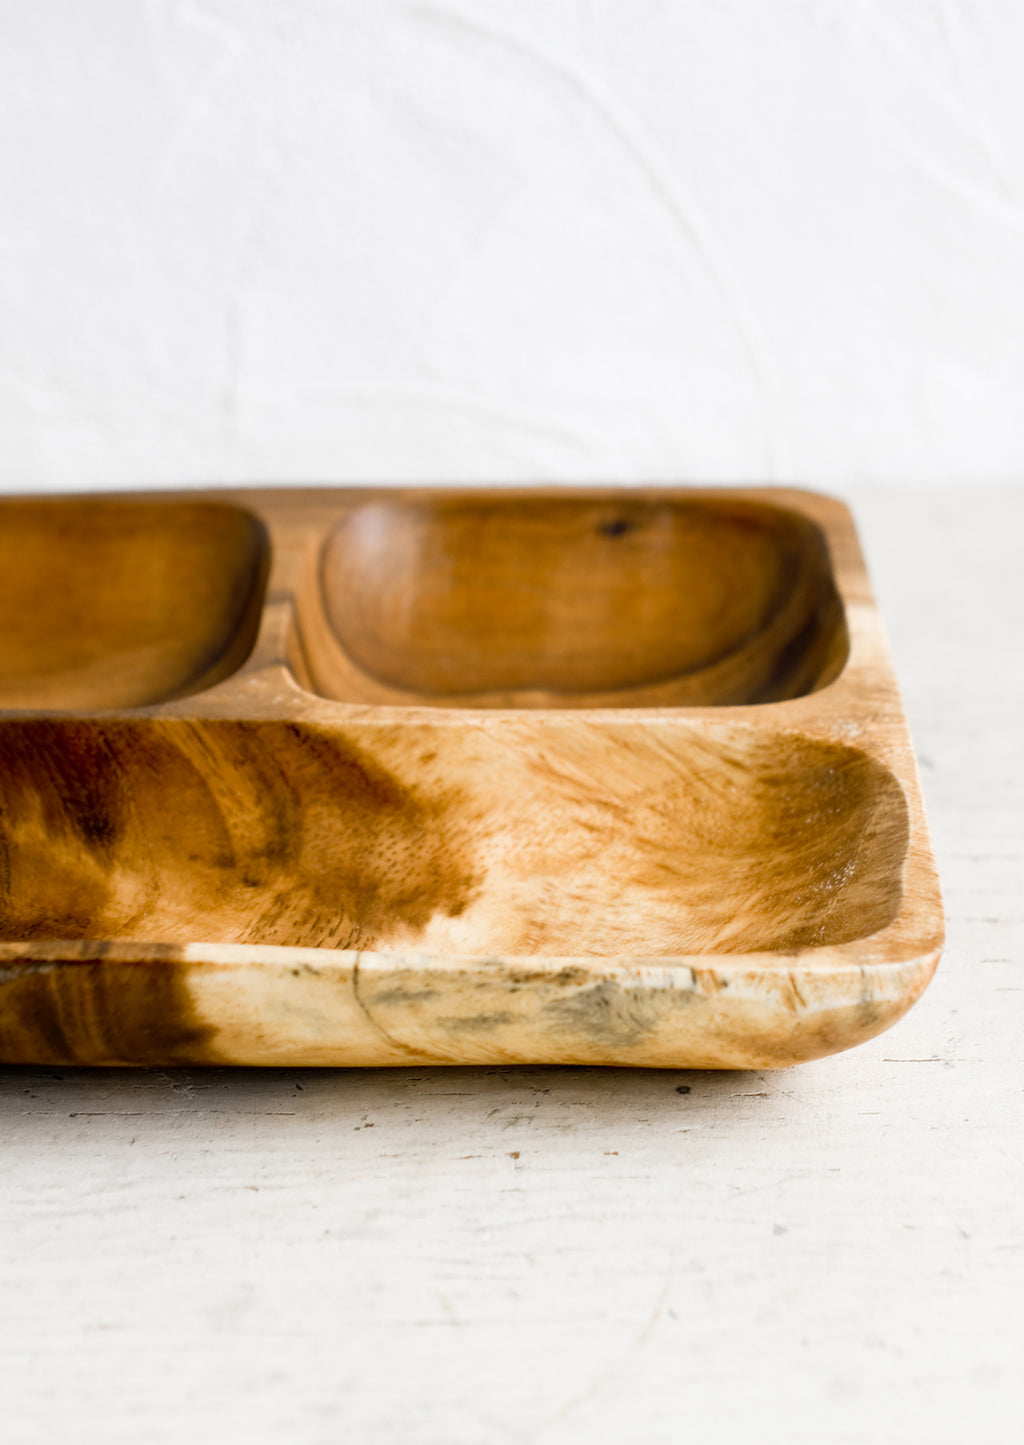 2: A wooden tray with compartments.